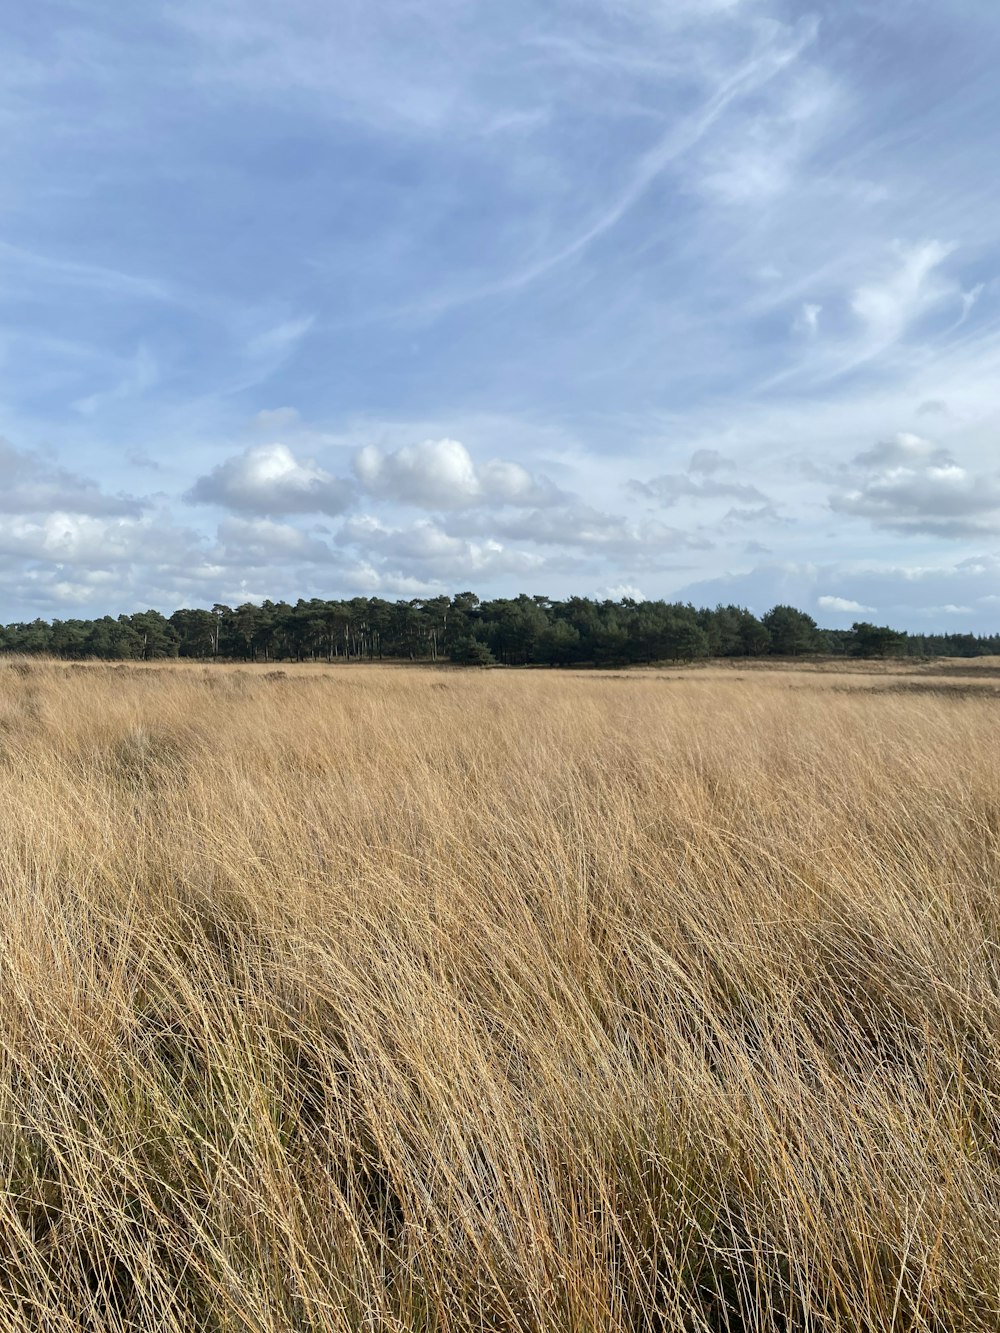 a field of tall dry grass with trees in the background